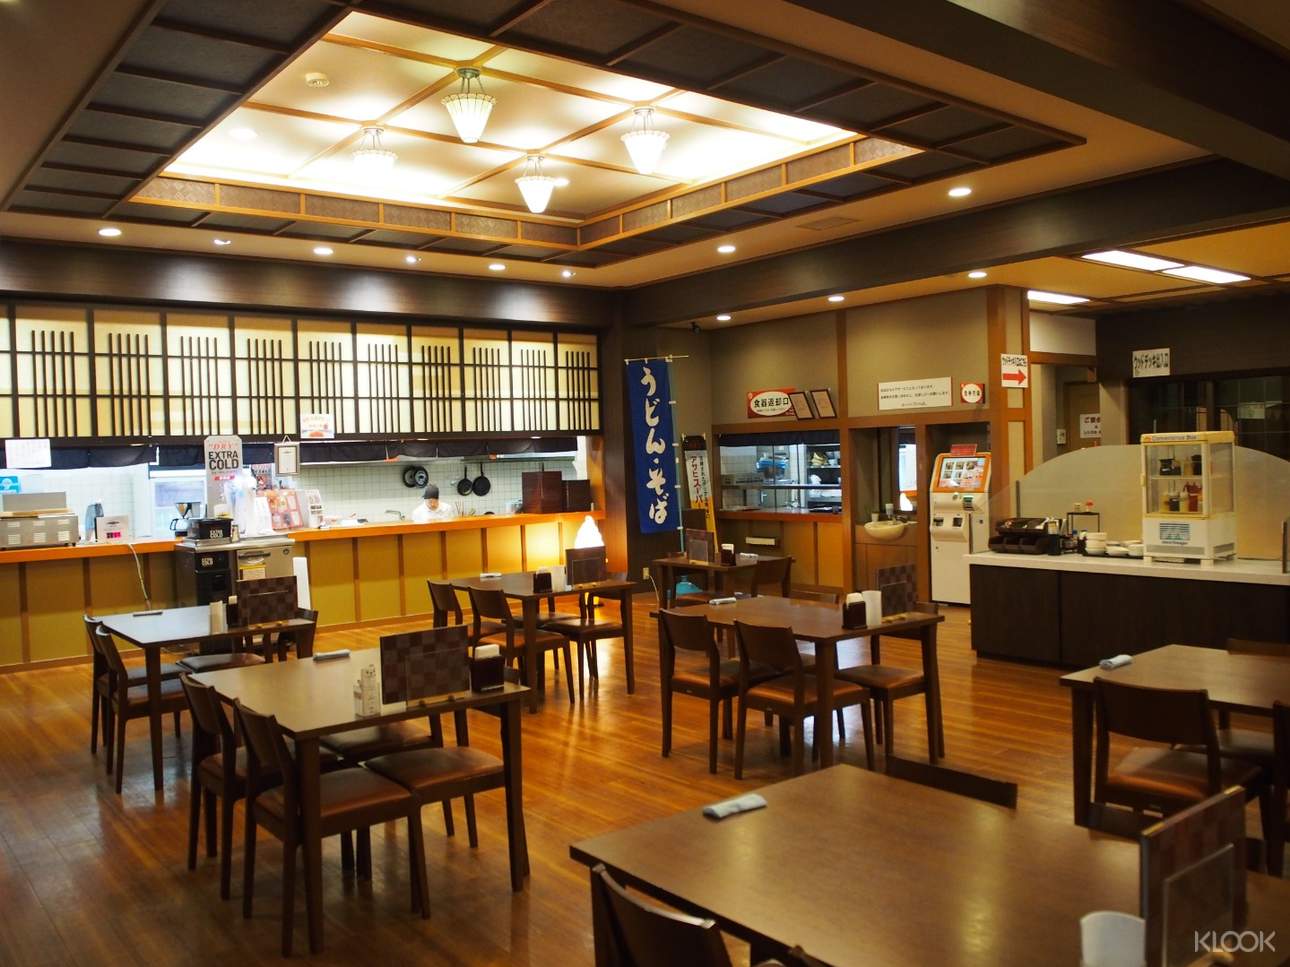 Sample authentic dishes prepared by Japanese traditional styles